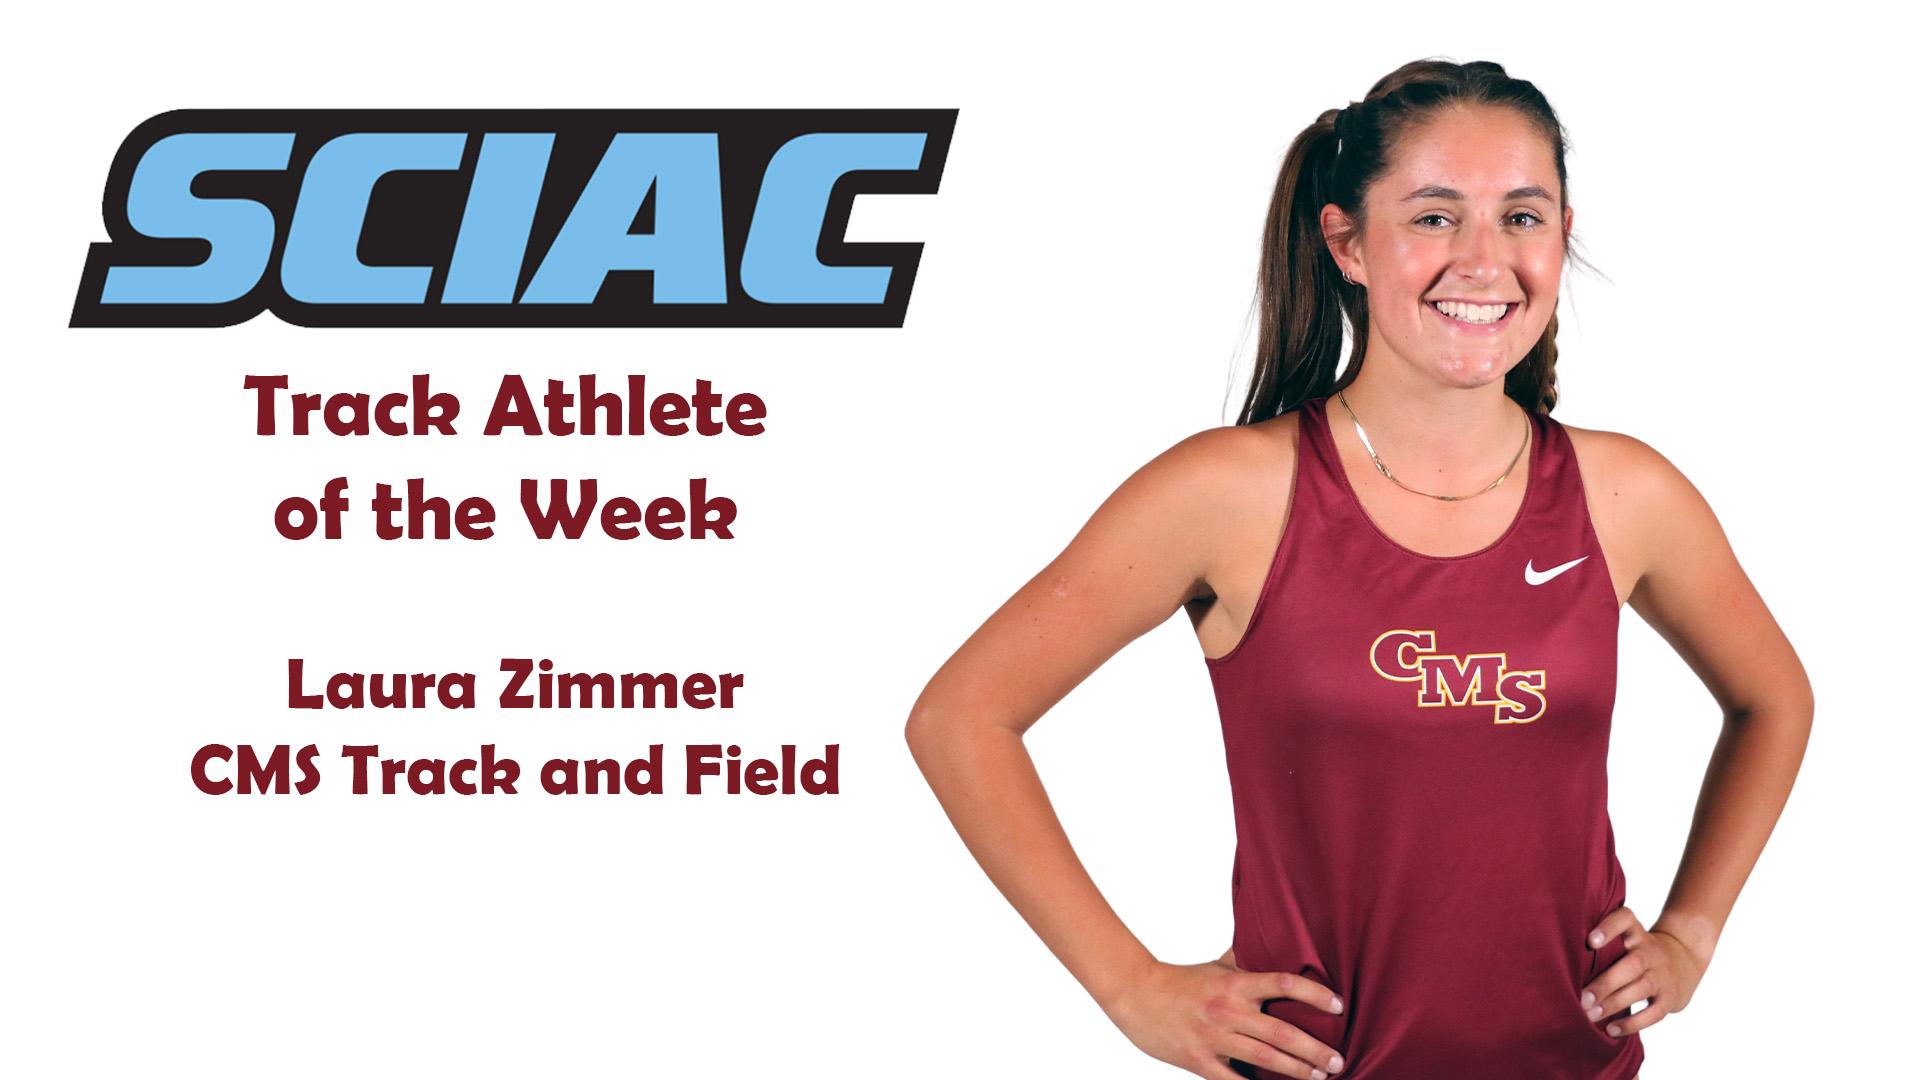 posed shot of Laura Zimmer with the SCIAC logo